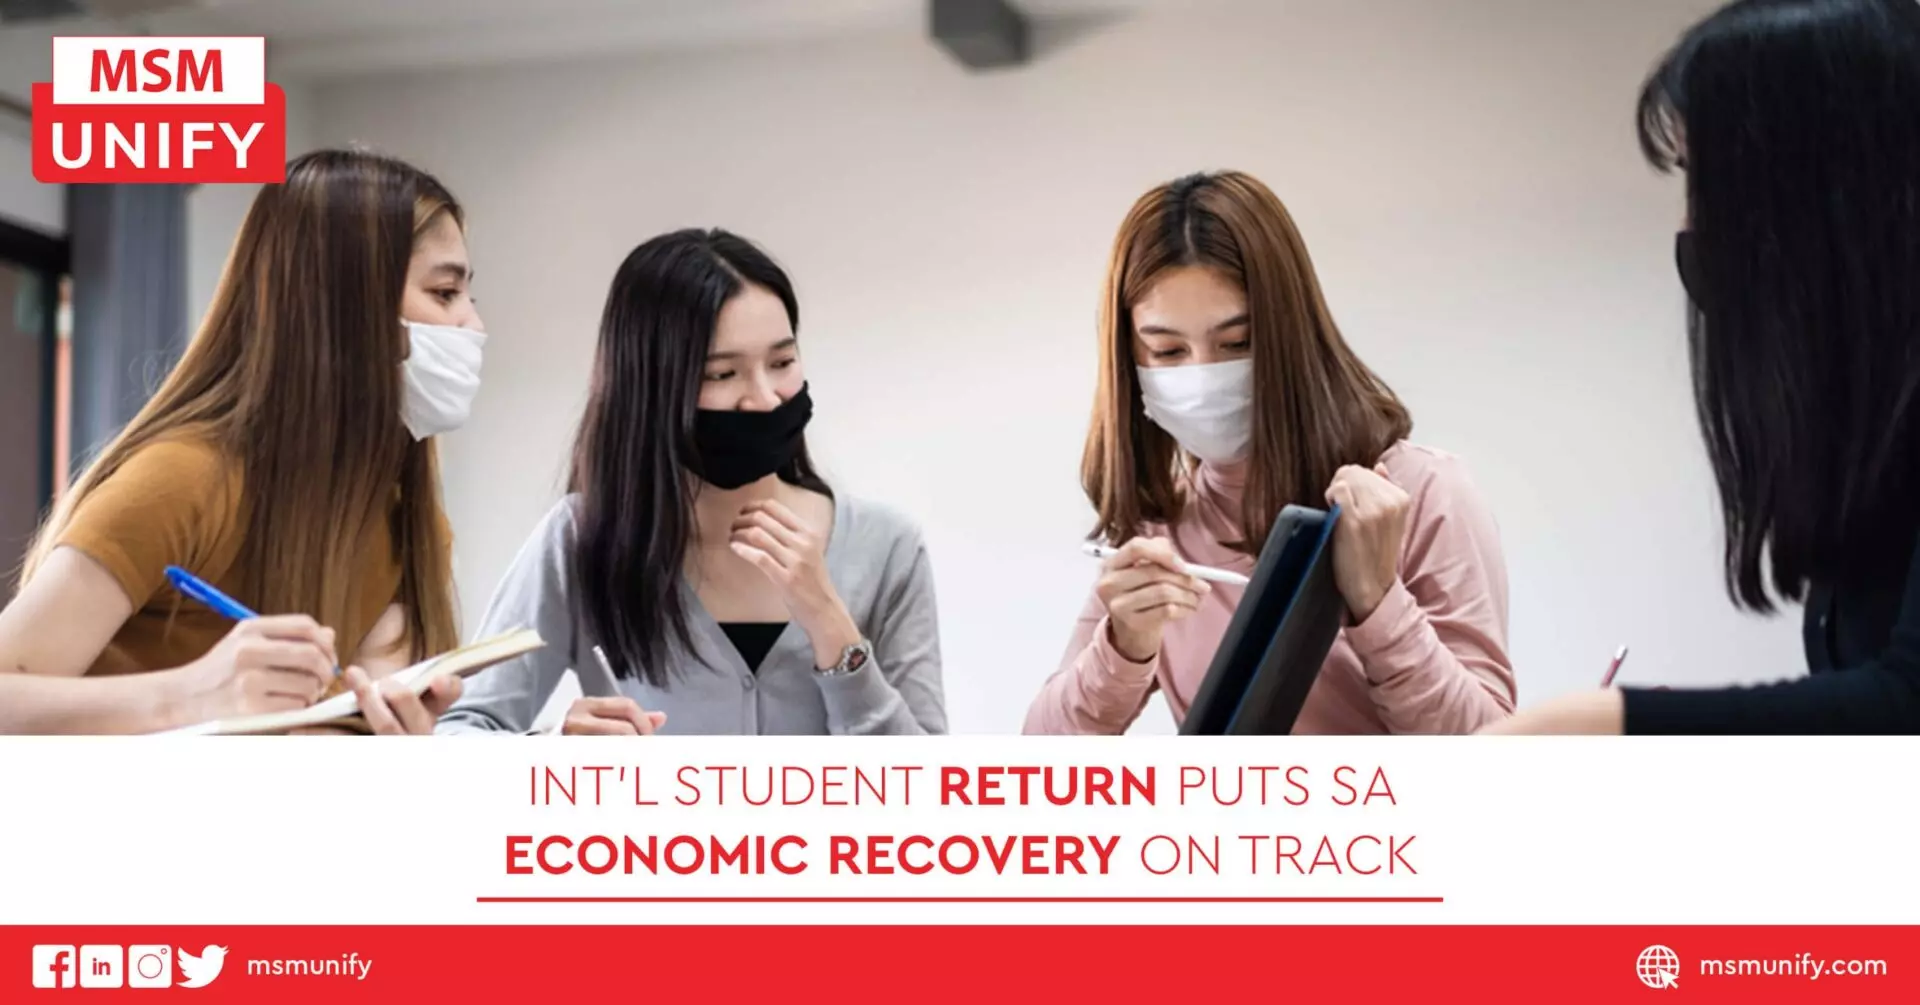 Intl Student Return Puts SA Economic Recovery On Track scaled 1